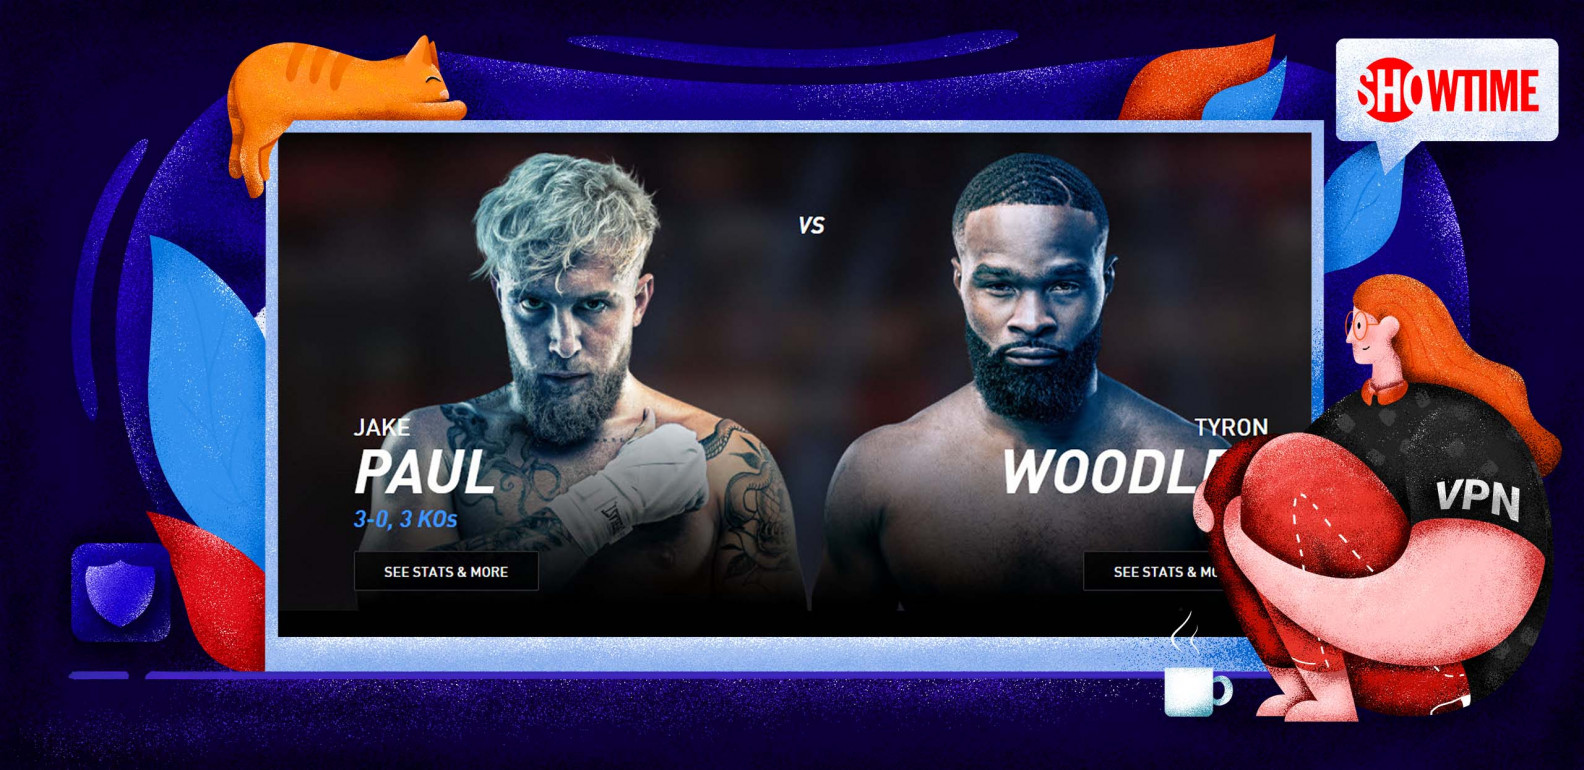 Come guardare in streaming il match tra Jake Paul e Tyron Woodley